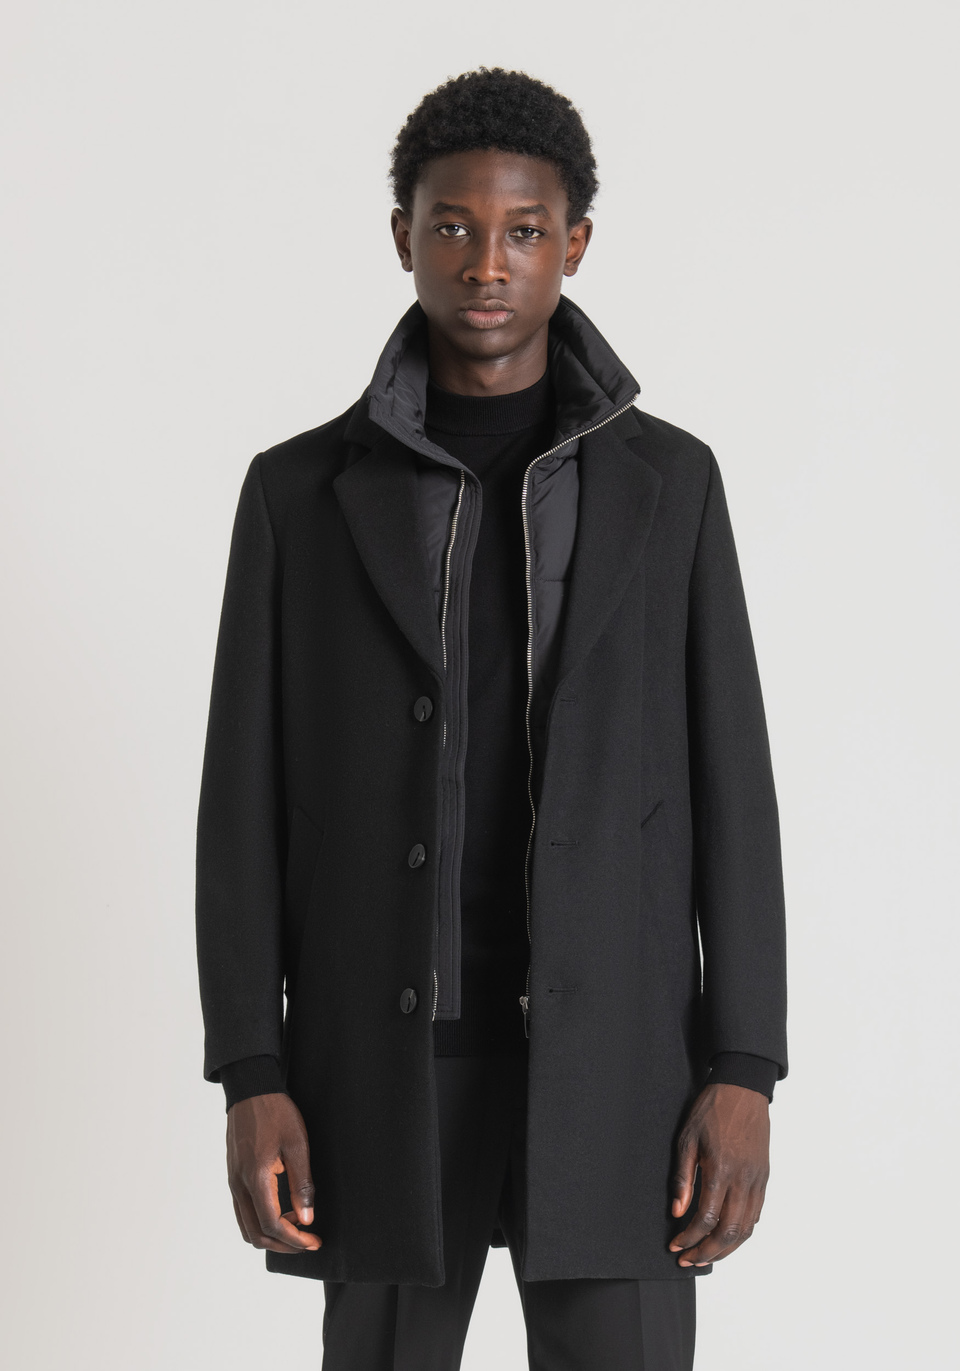 "RUPERT" REGULAR FIT COAT IN WOOL AND CASHMERE BLEND WITH TECHNICAL FABRIC INSERT - Antony Morato Online Shop